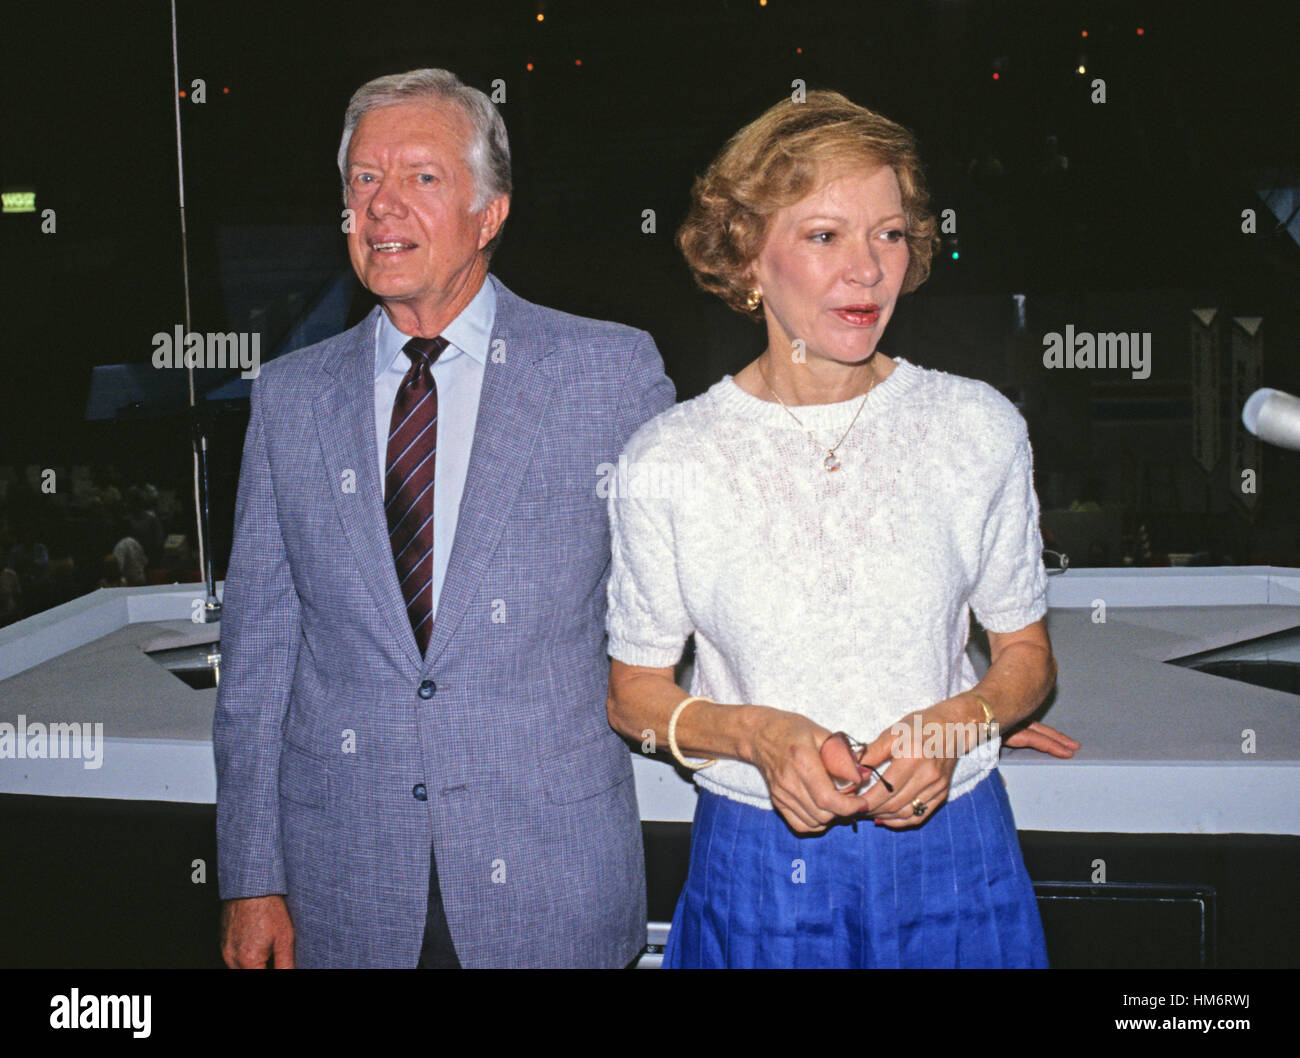 Former United States President Jimmy Carter, accompanied by his wife, former first lady Rosalynn Carter, visits the Omni Coliseum in Atlanta, Georgia prior to his addressing the 1988 Democratic National Convention on July 18, 1988. Stock Photo